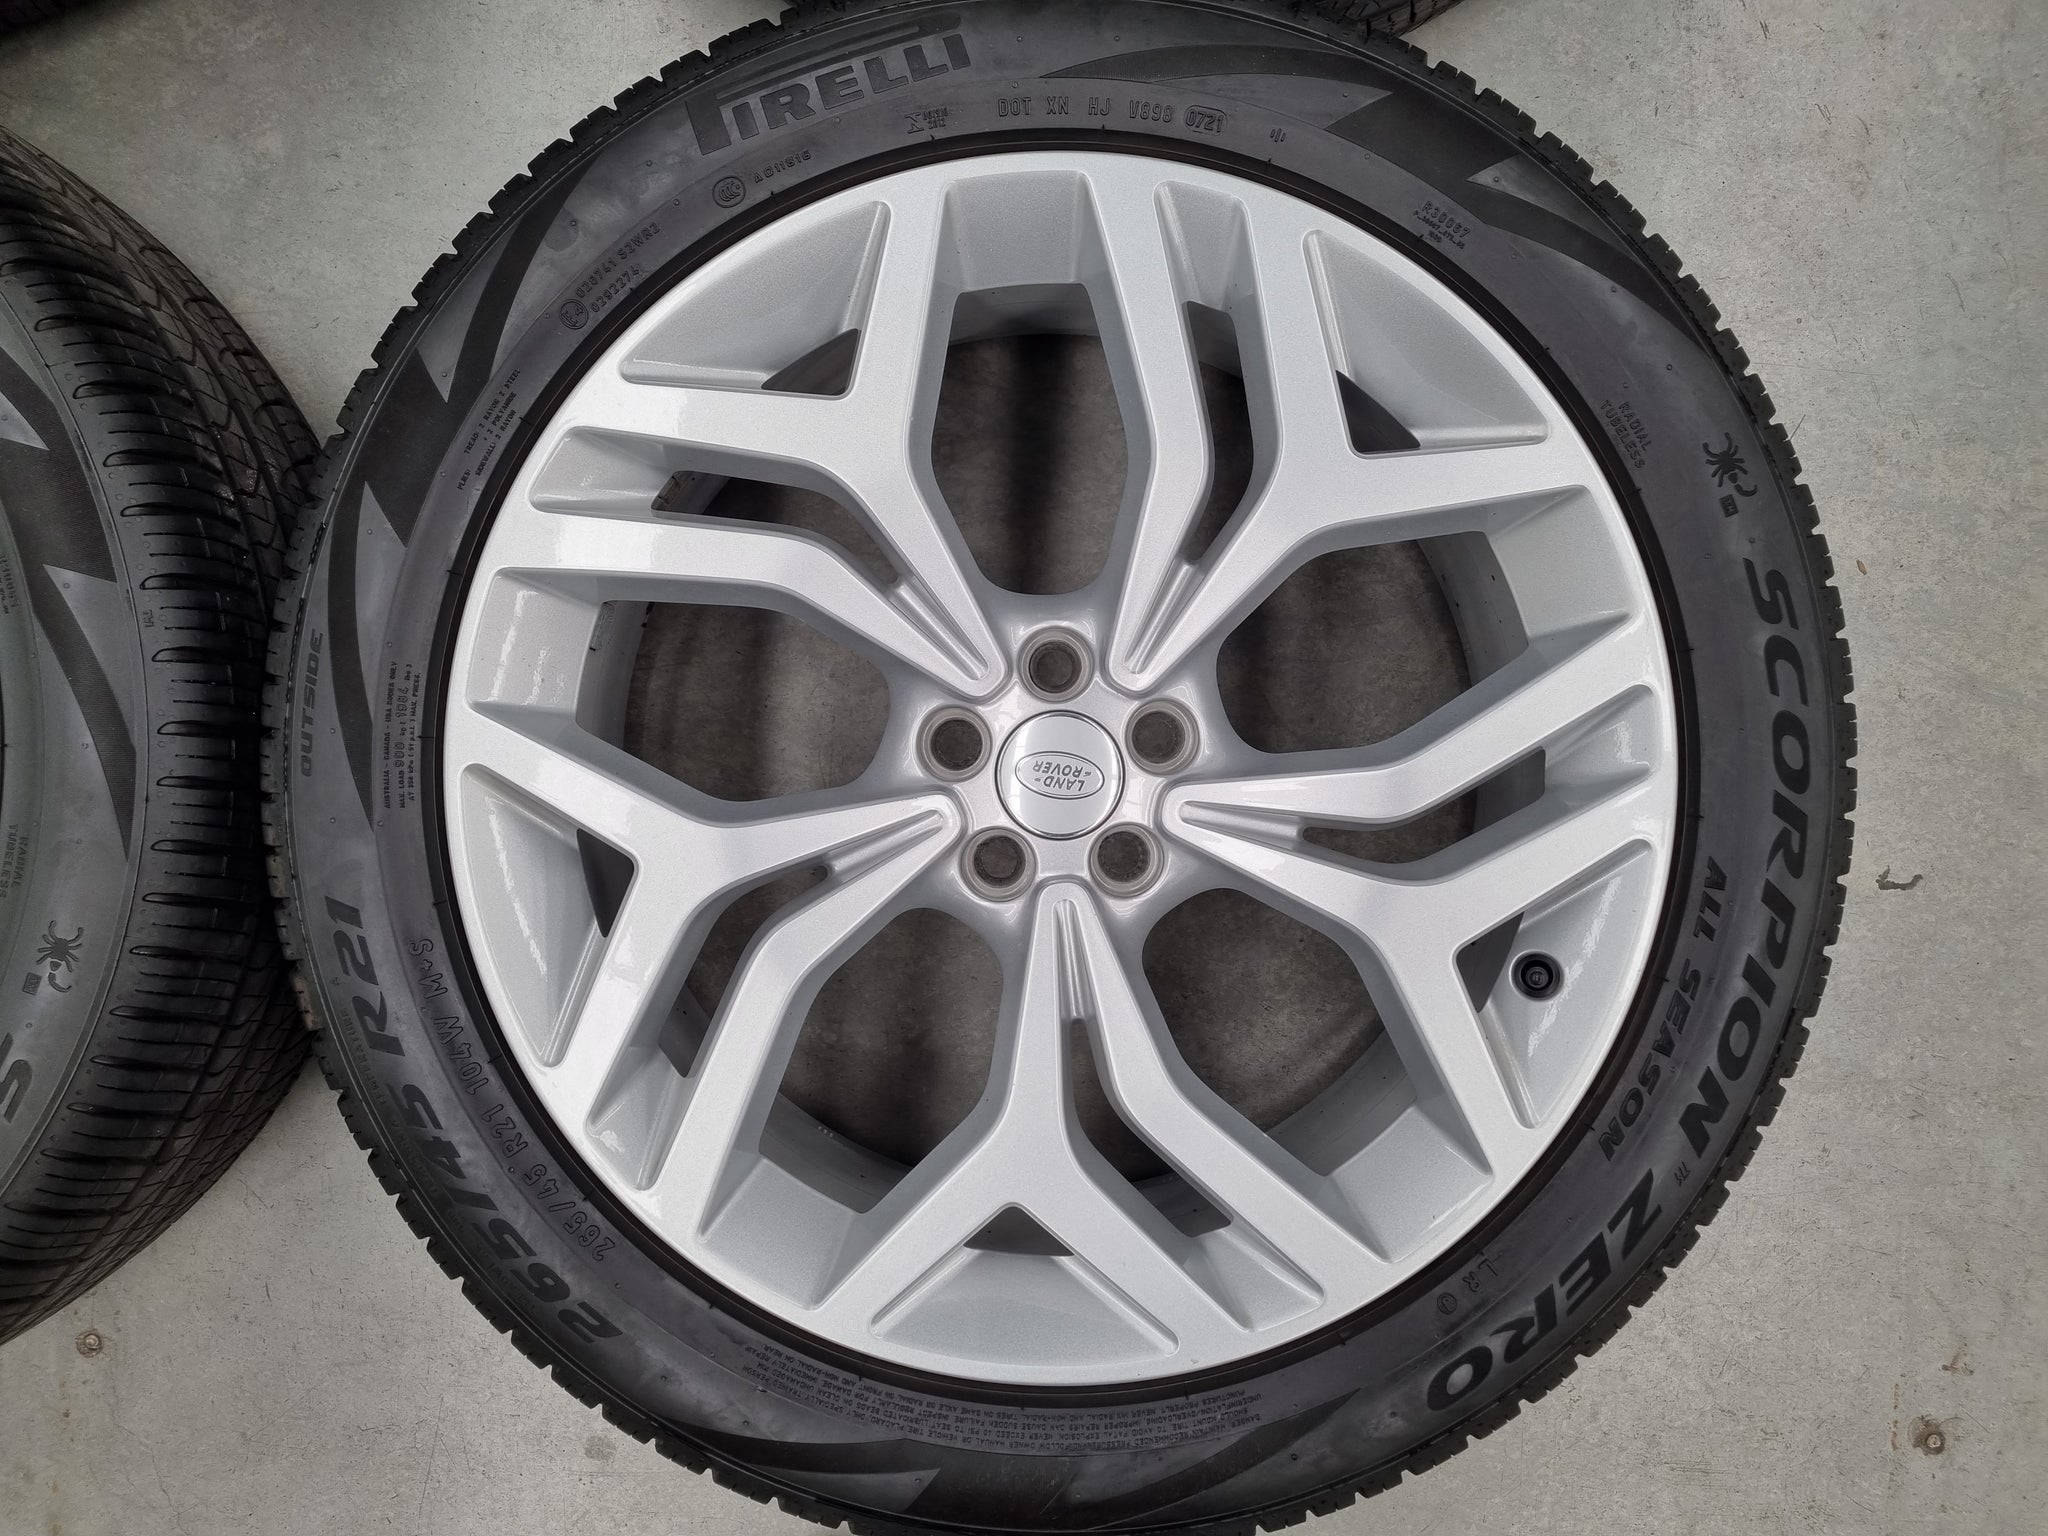 Load image into Gallery viewer, Genuine Range Rover Velar Silver 21 Inch Wheels and Tyres Set of 4
